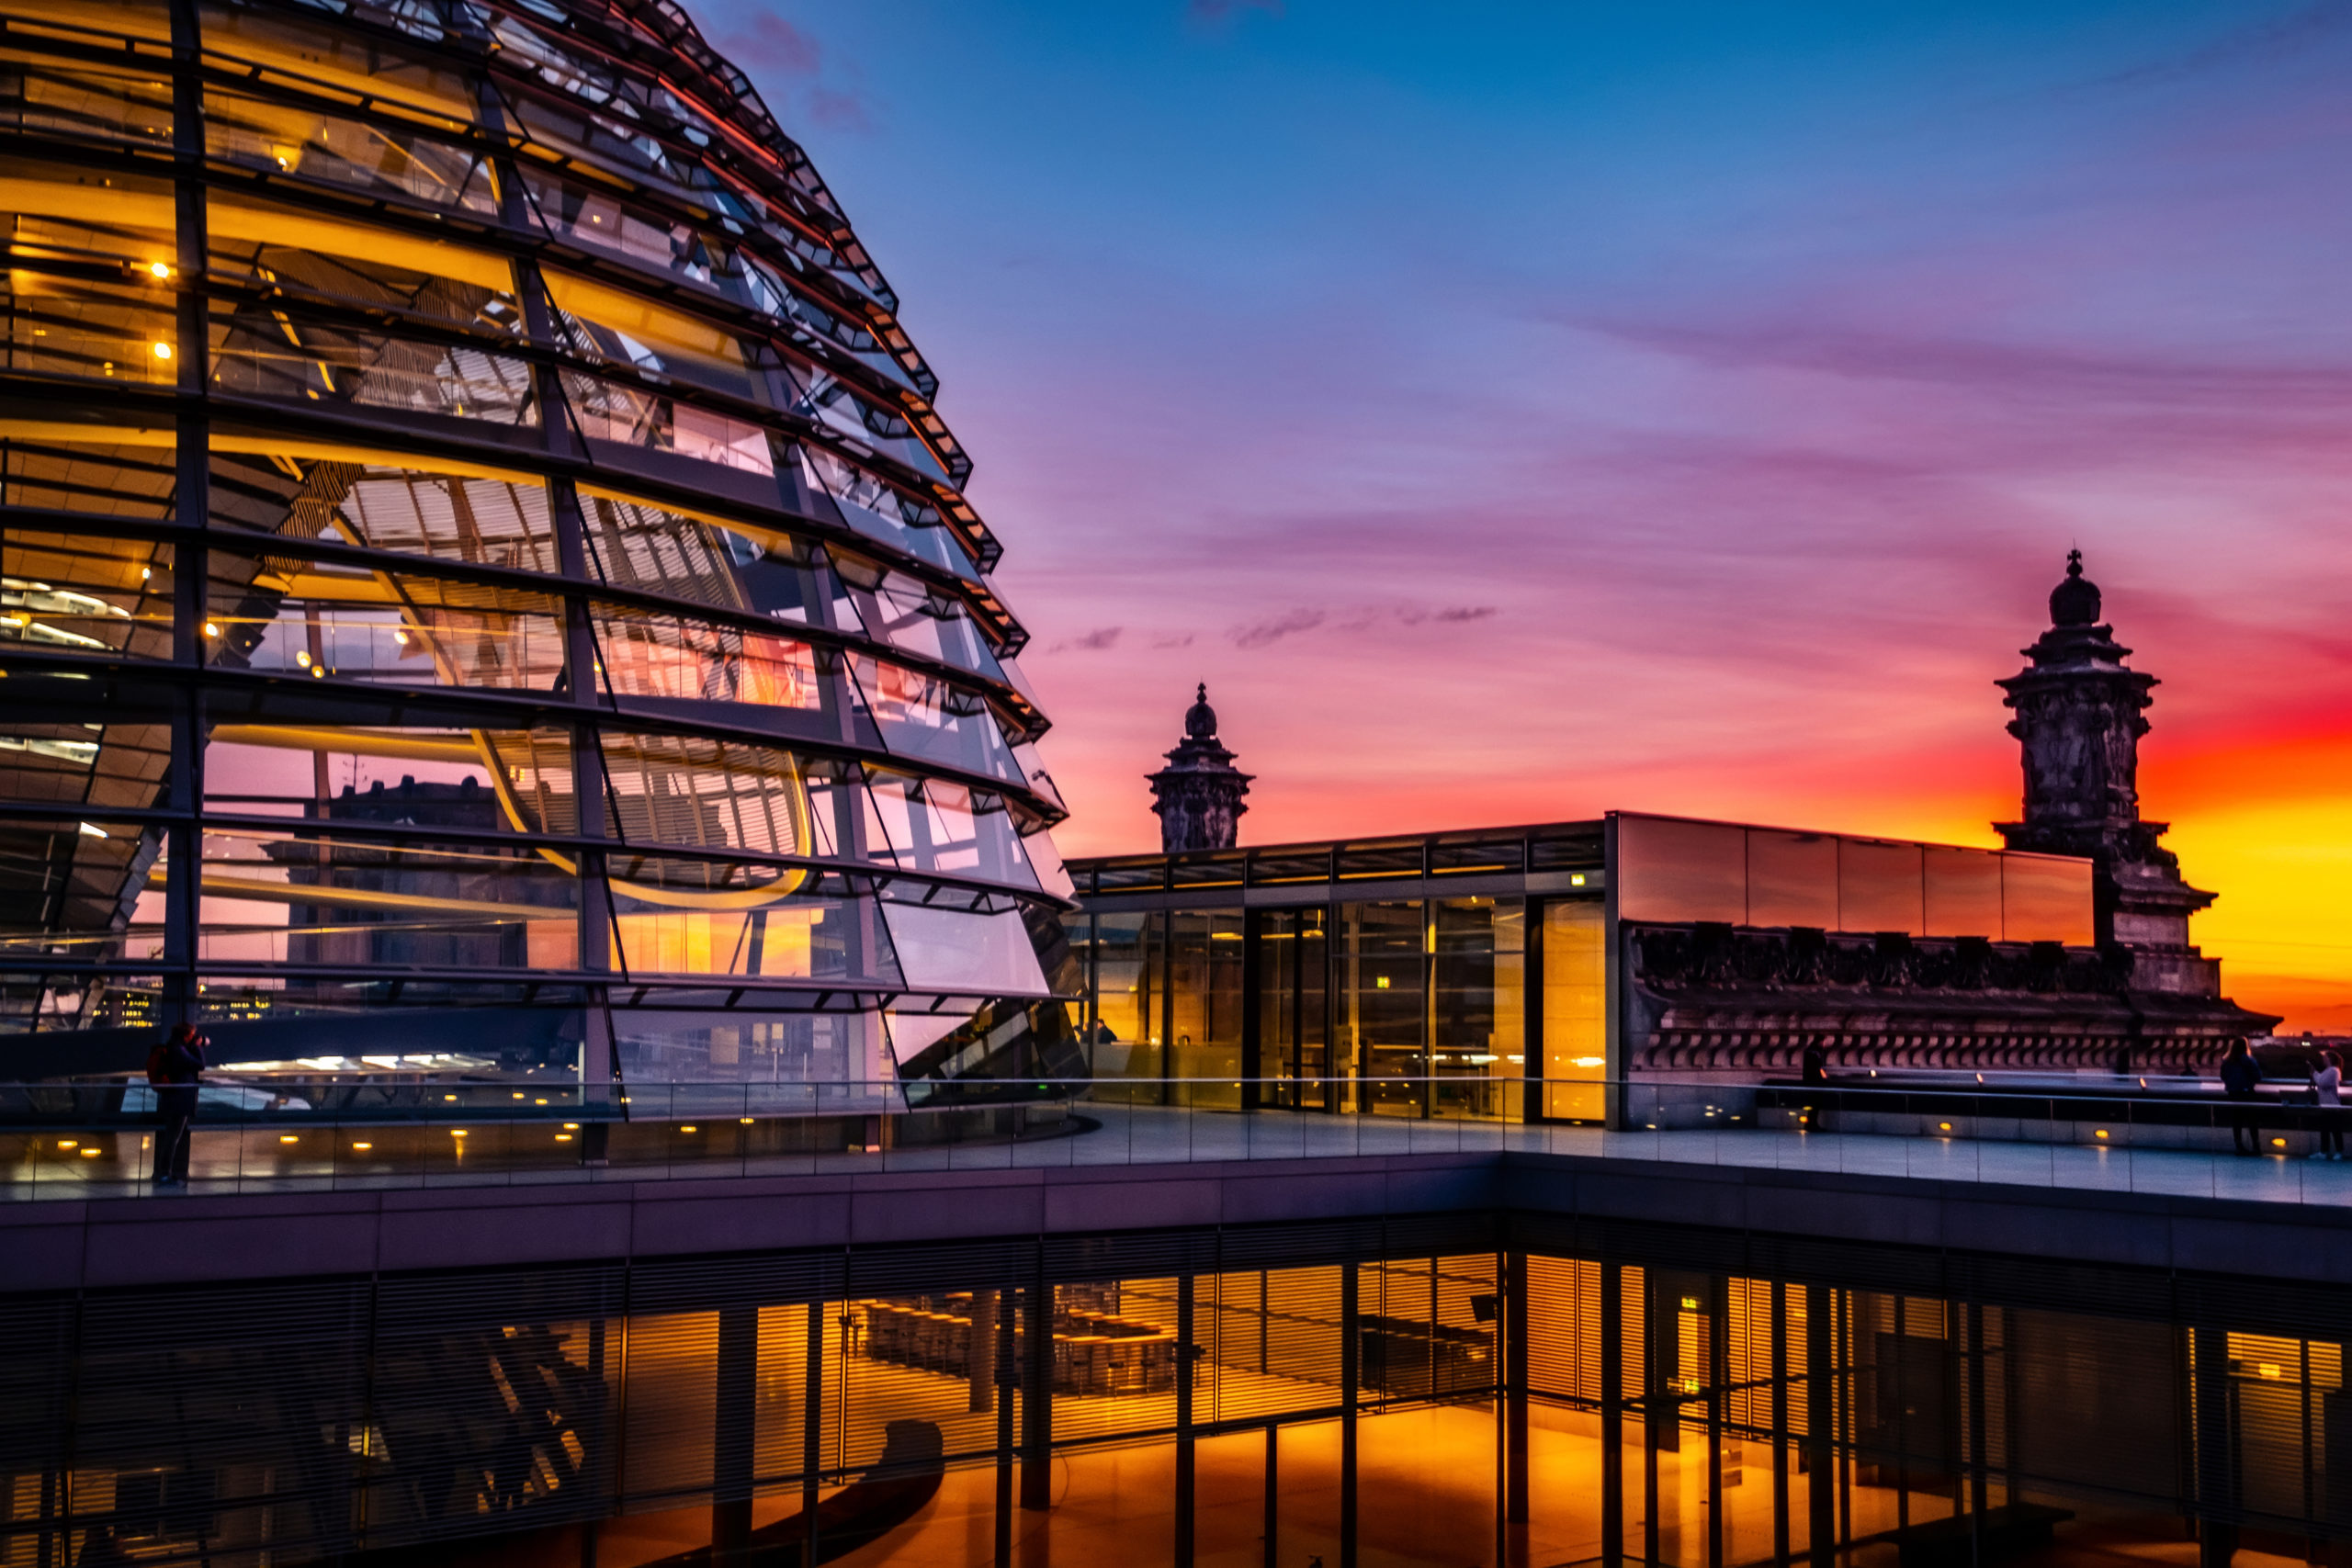 Reichstag large glass dome and roof terrace at sunset